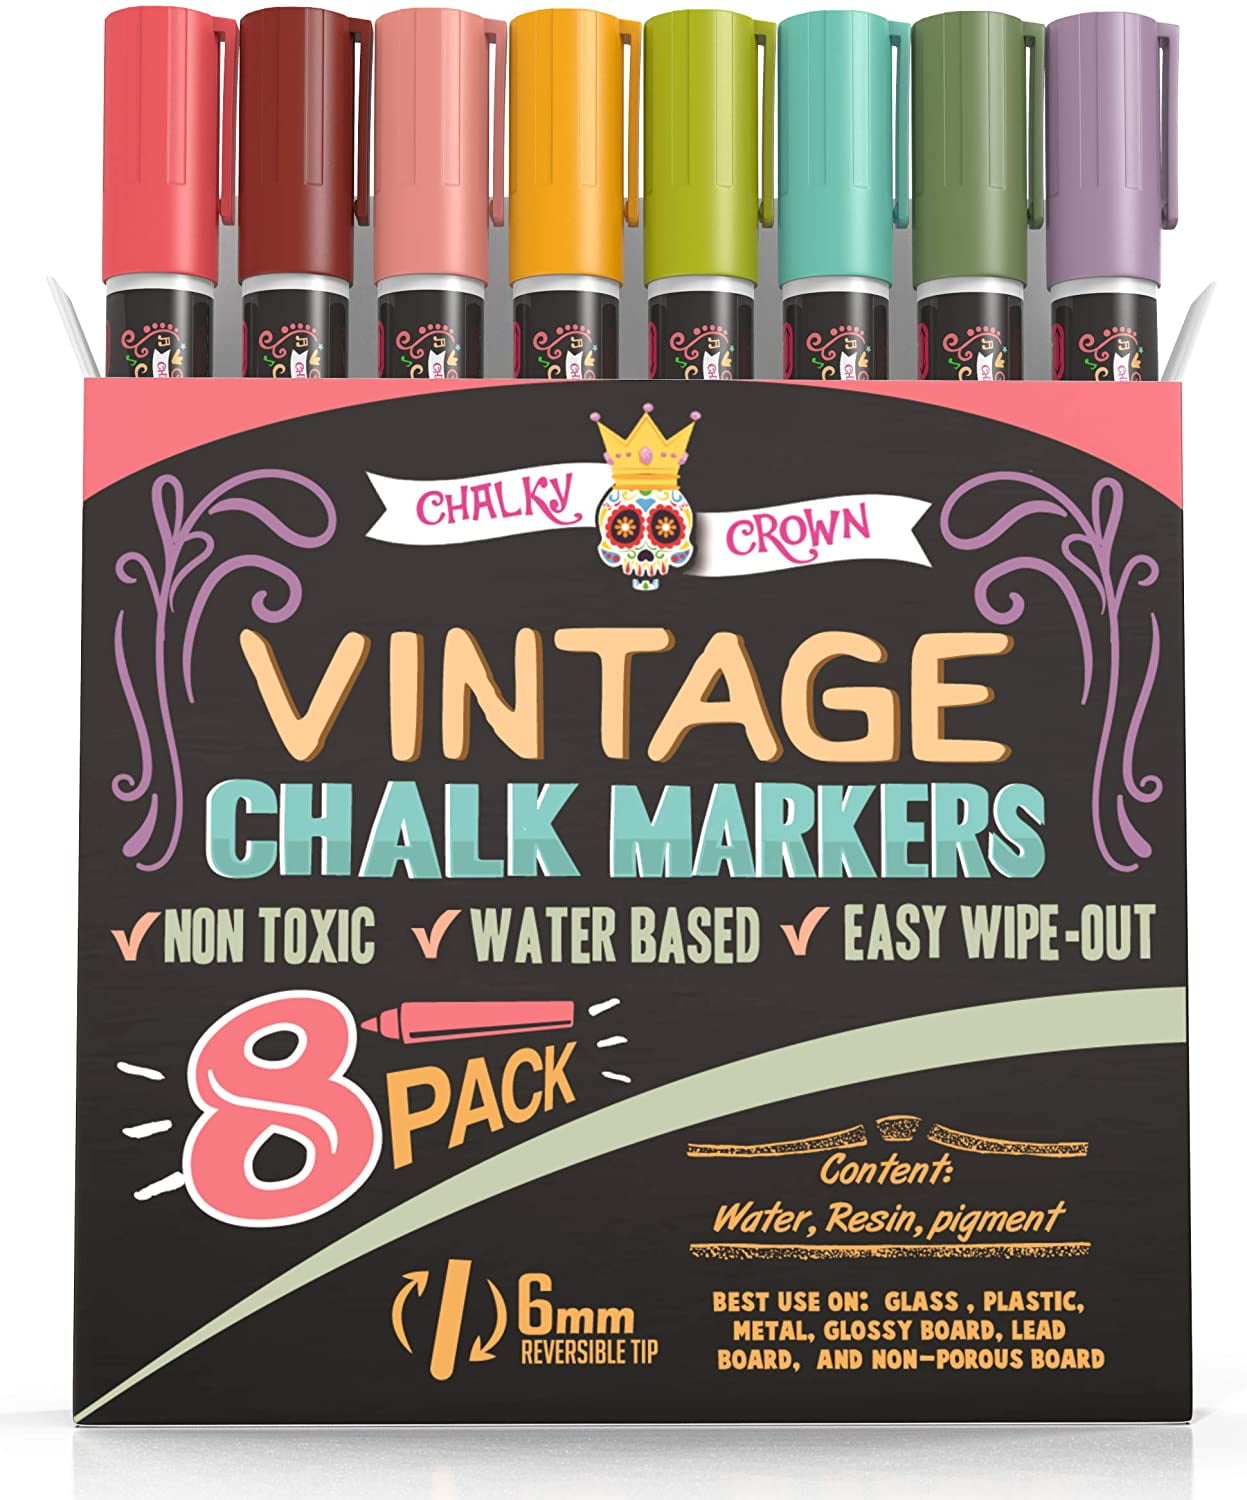  Vaci 8 Multicolored Liquid Chalk Markers with Tape, Stencils &  Labels, Erasable, Non-Toxic, Water-Based Pens, 6 mm Reversible Tip, On  Chalkboards, Windows, Glass, Blackboards & More